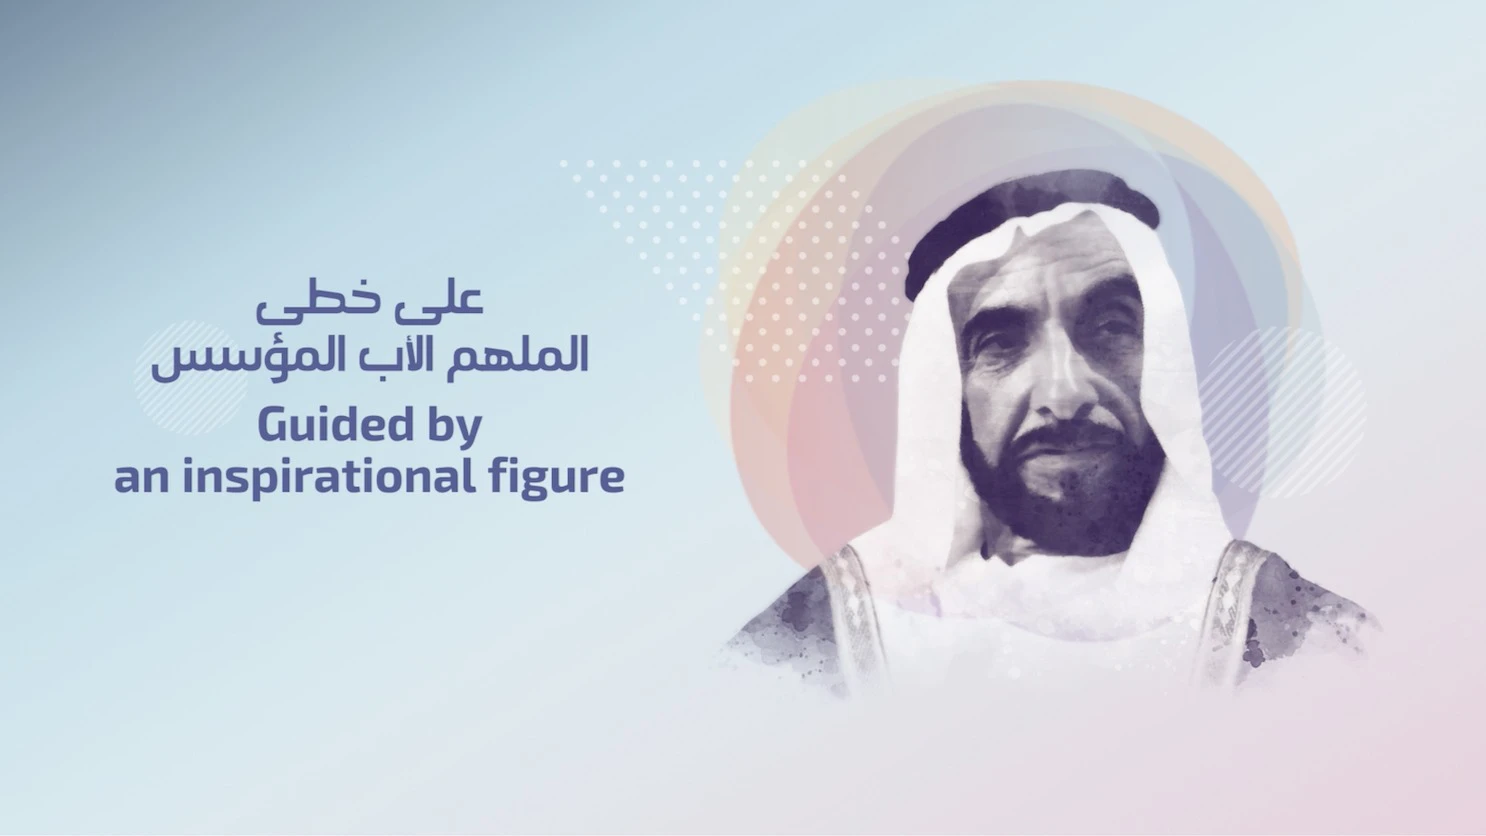 Ministry of Interior - zayed the inspirer social media management 2020 - banner